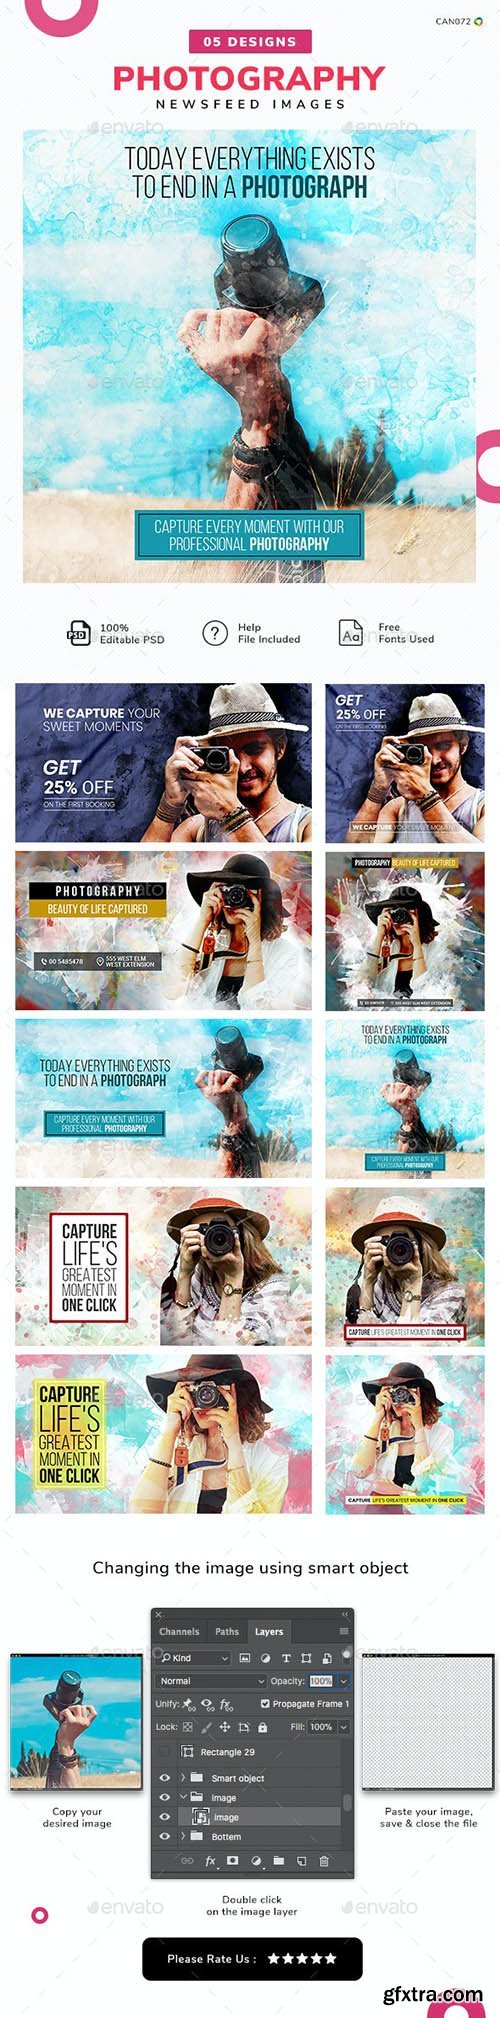 GraphicRiver - Photography Social Media News Feed Images Set - 05 Designs 25846392